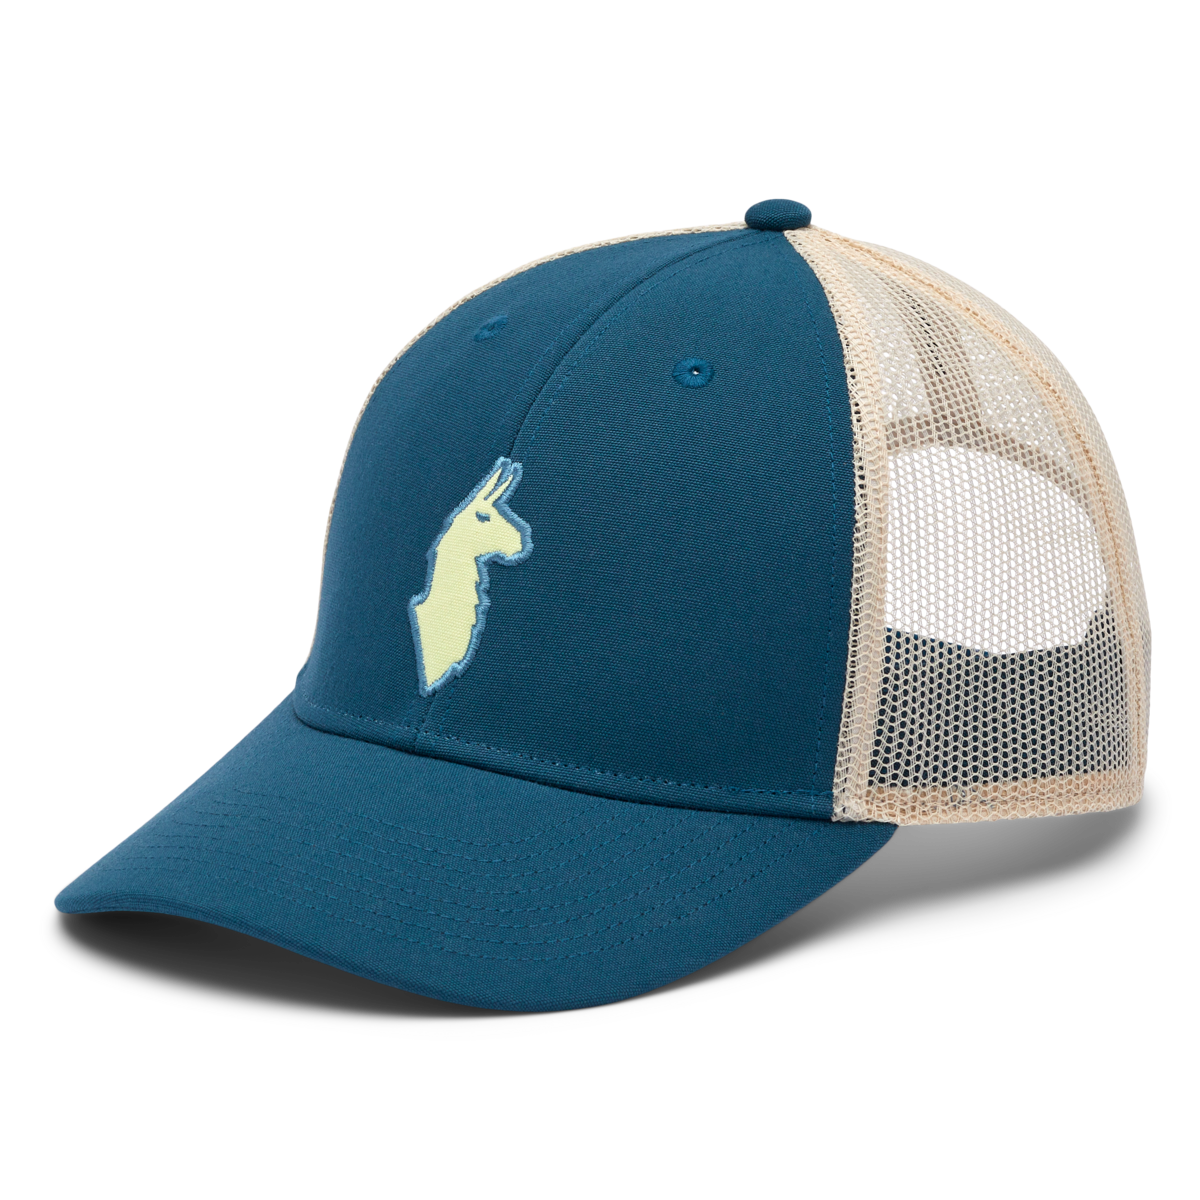 Cotopaxi Sunny Side Trucker Hat